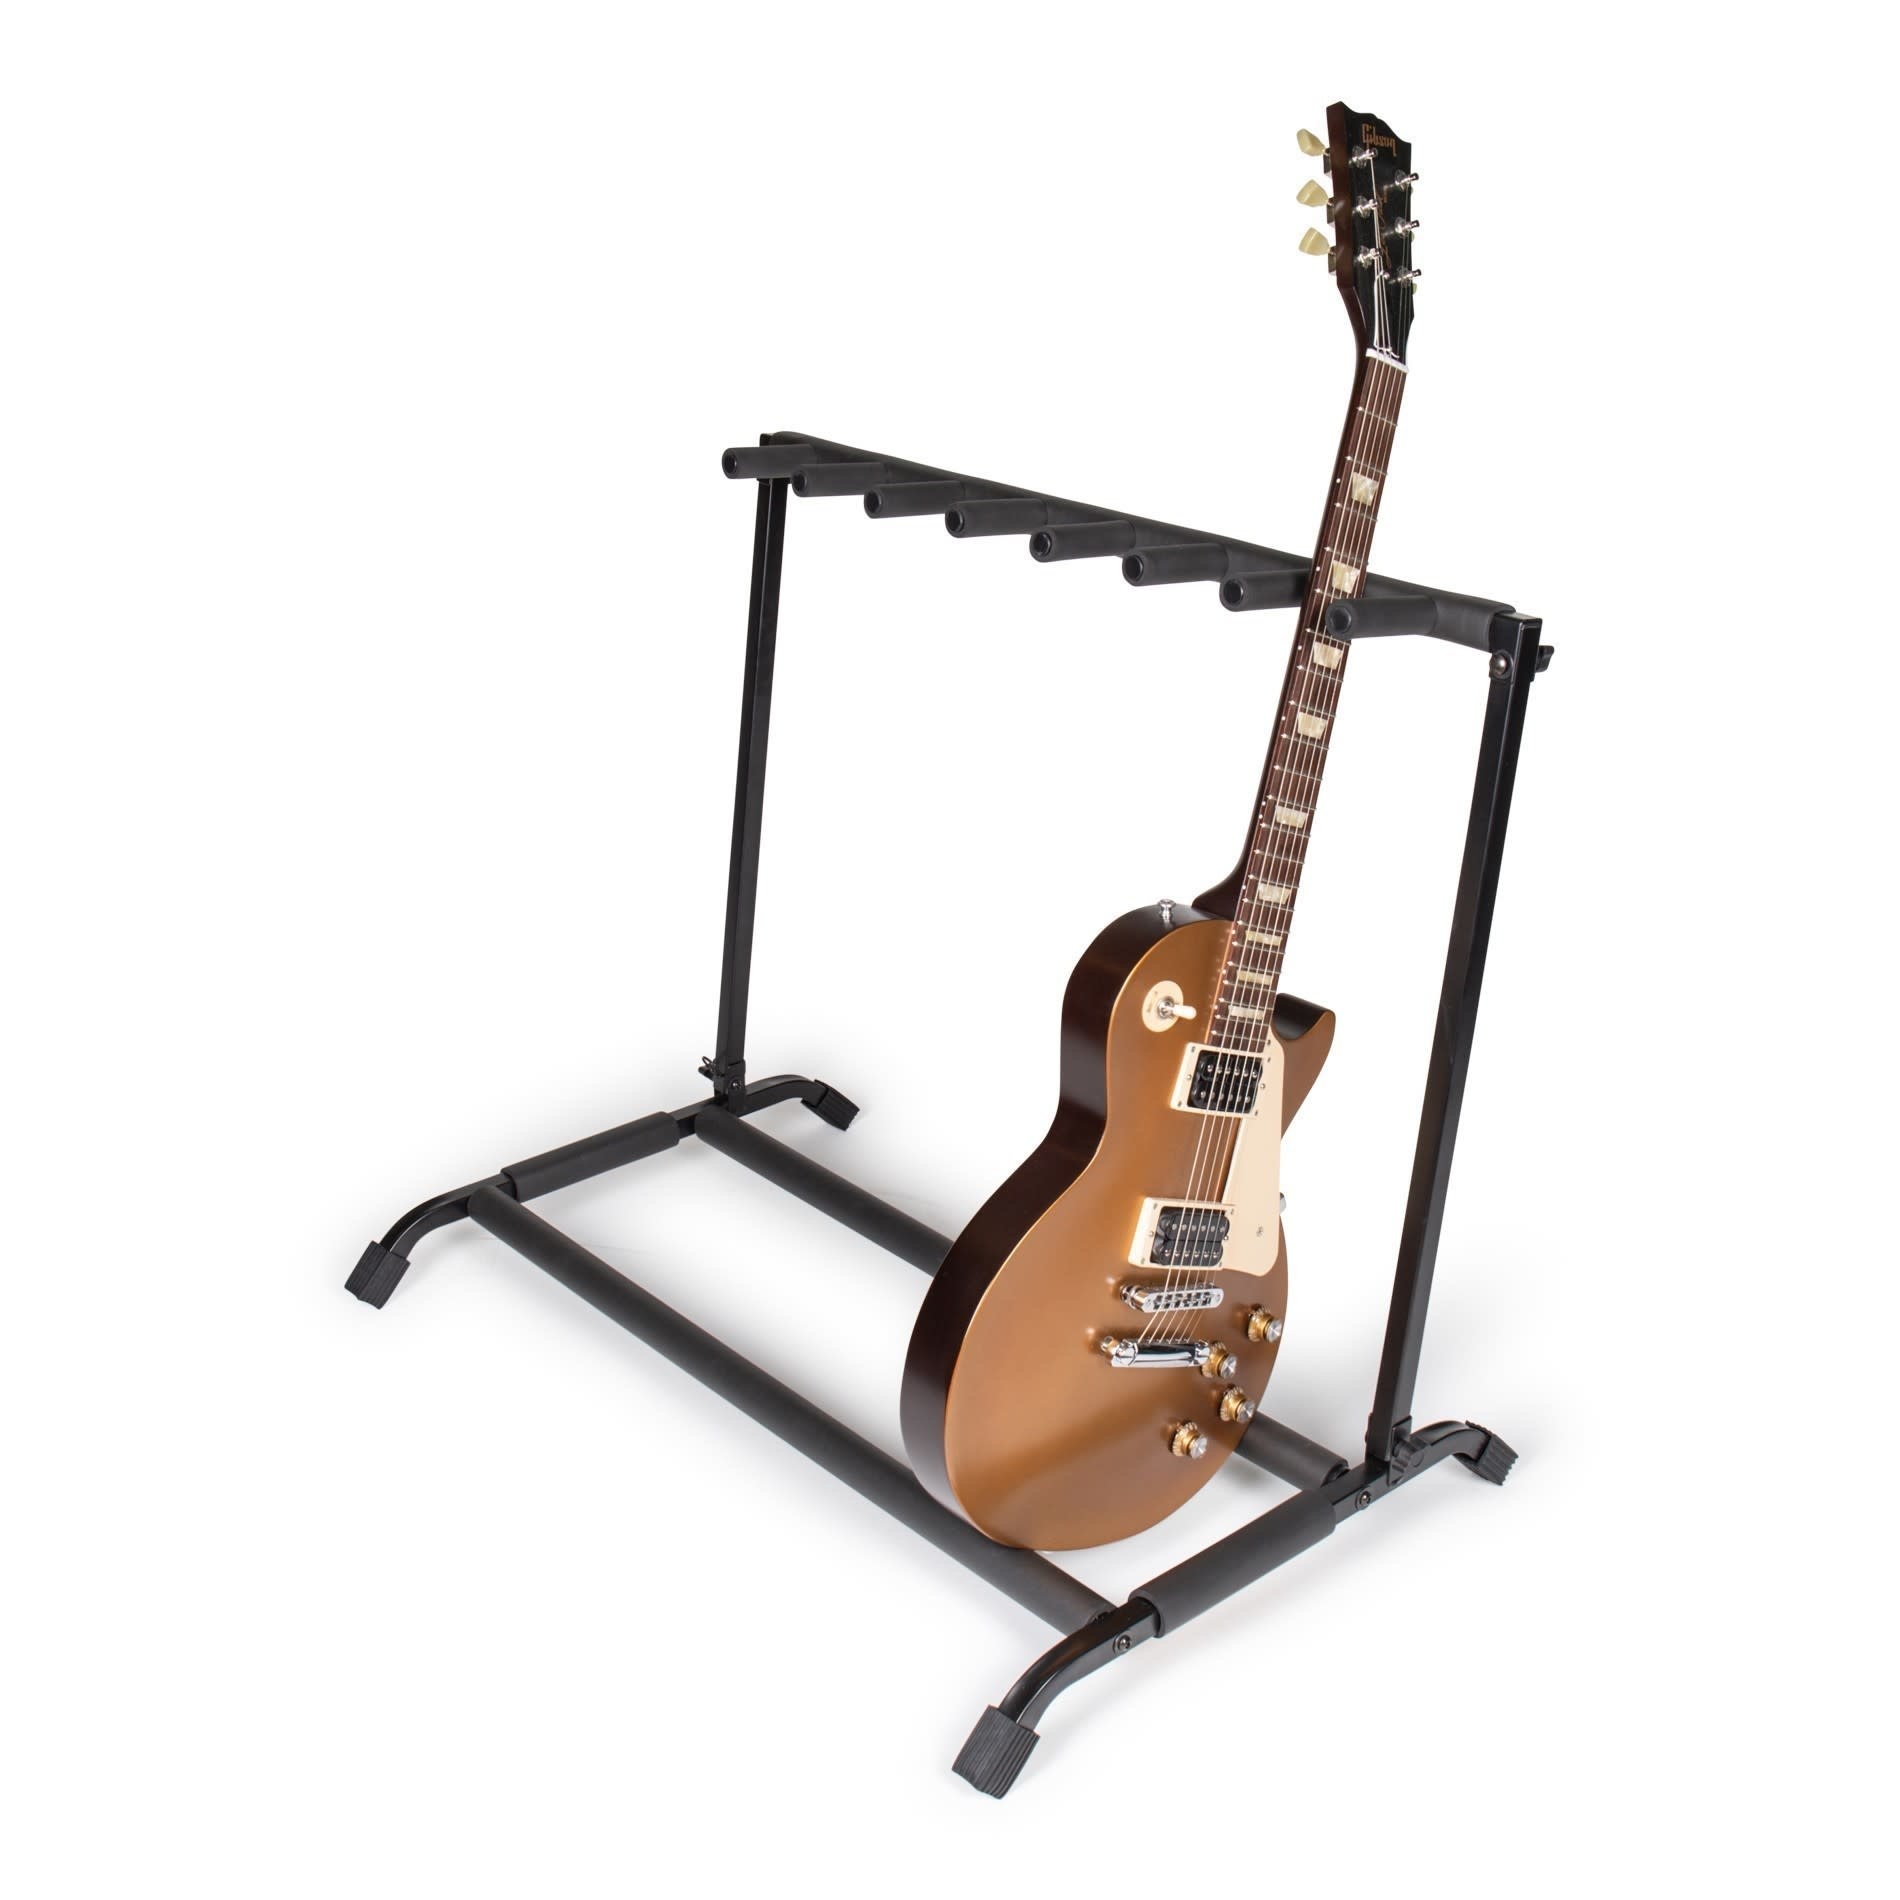 Rok-It Collapsible 7-Space Guitar Rack - B's Shop